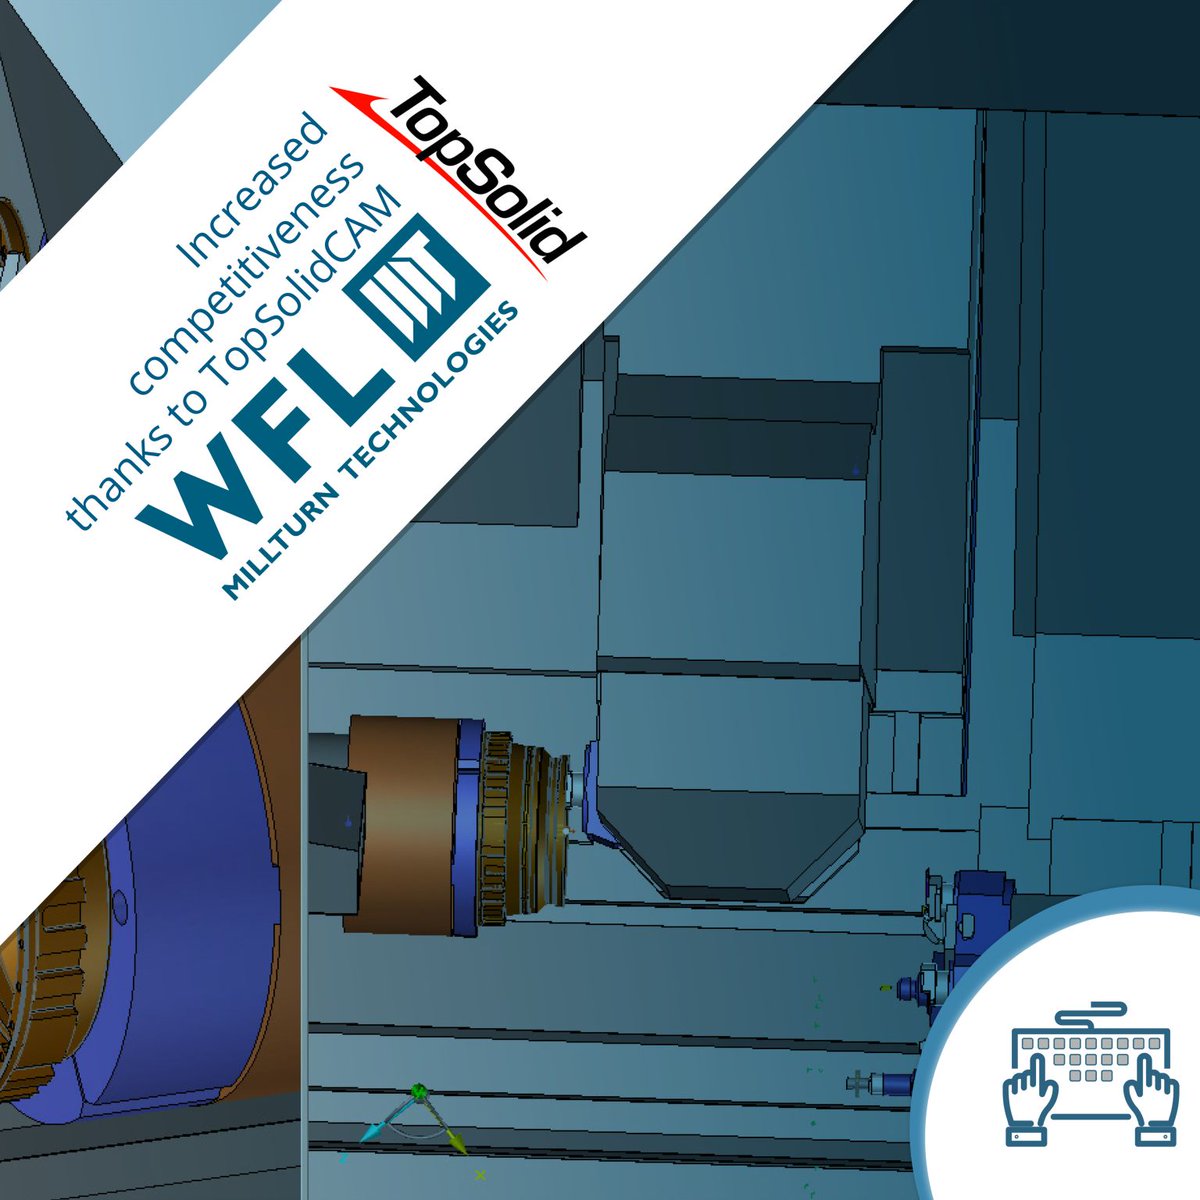 #TopSolid #WFL #NEWS 
TopSolid'CAM: an easy-to-use, intuitive, and progressive manufacturing solution.....
Developed with Evolving Technologies GmbH. 

Learn more: 
ow.ly/FRPS50NMyrI 

#WFL #completesolution 
#smartsolution #CAD #CAM #MILLTURN #evolvingtechnologiesgmbh